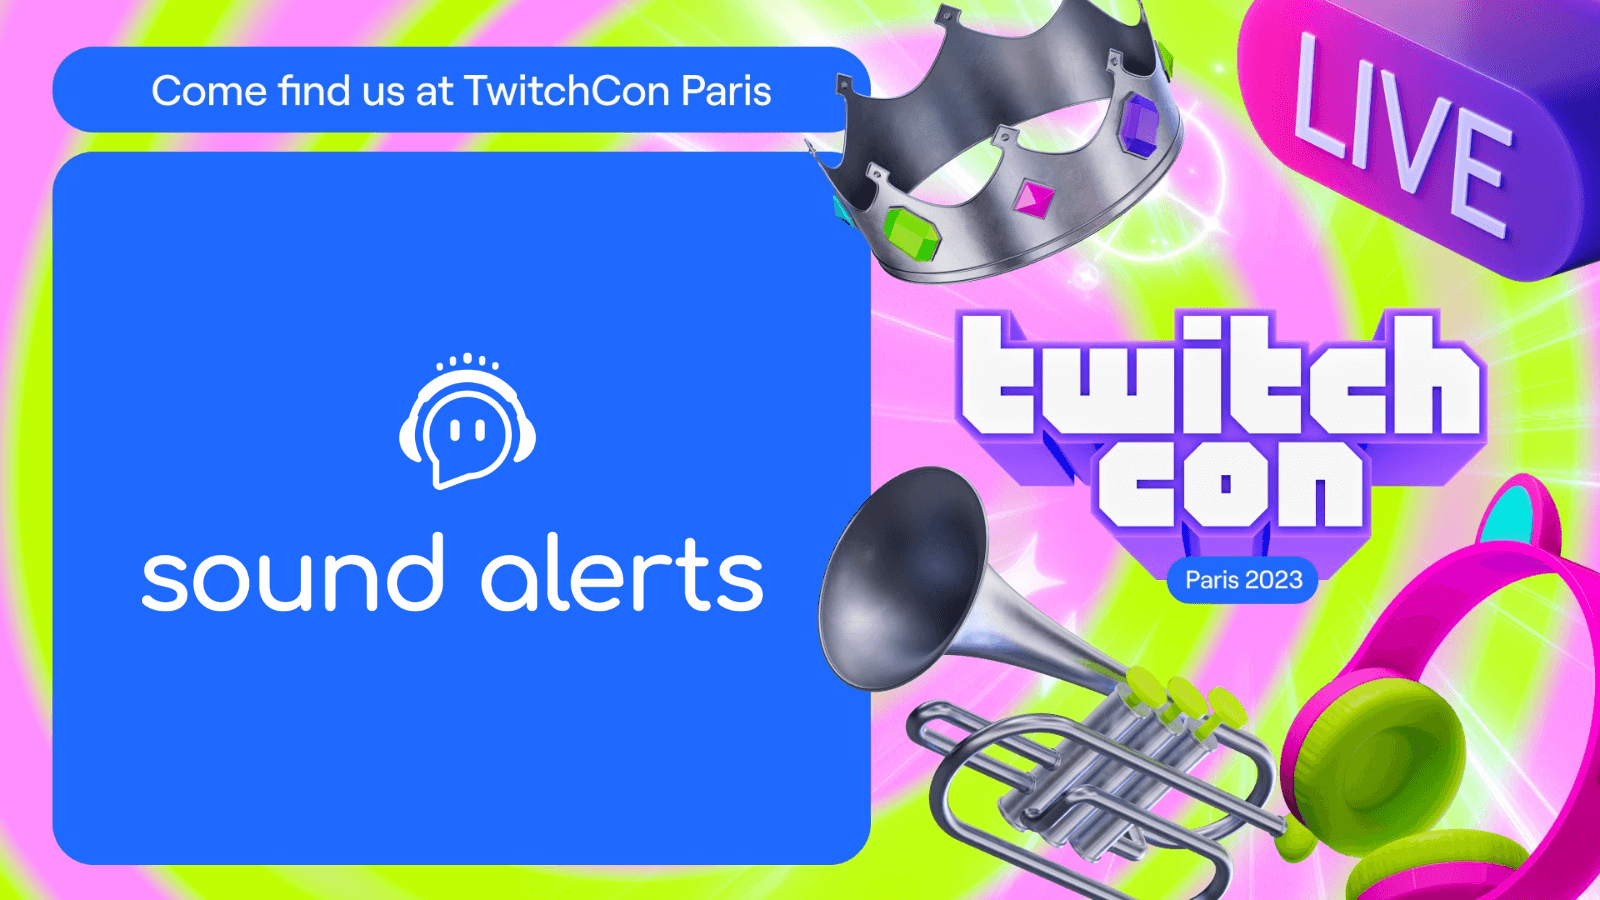 This image shows the Sound Alerts logo together with the TwitchCon Paris logo.